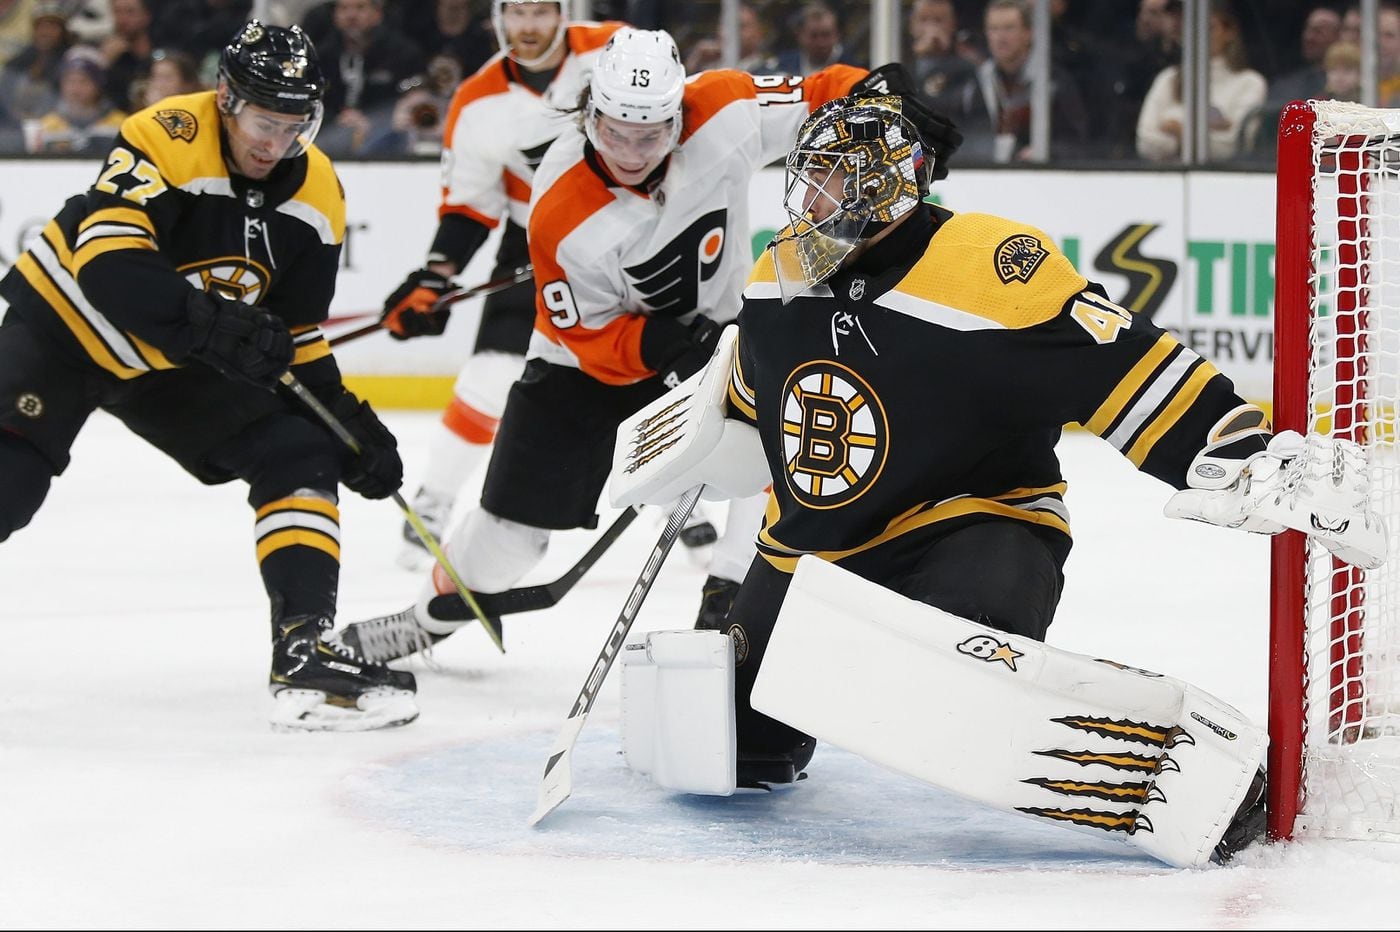 Boston Bruins defeat the Flyers 30